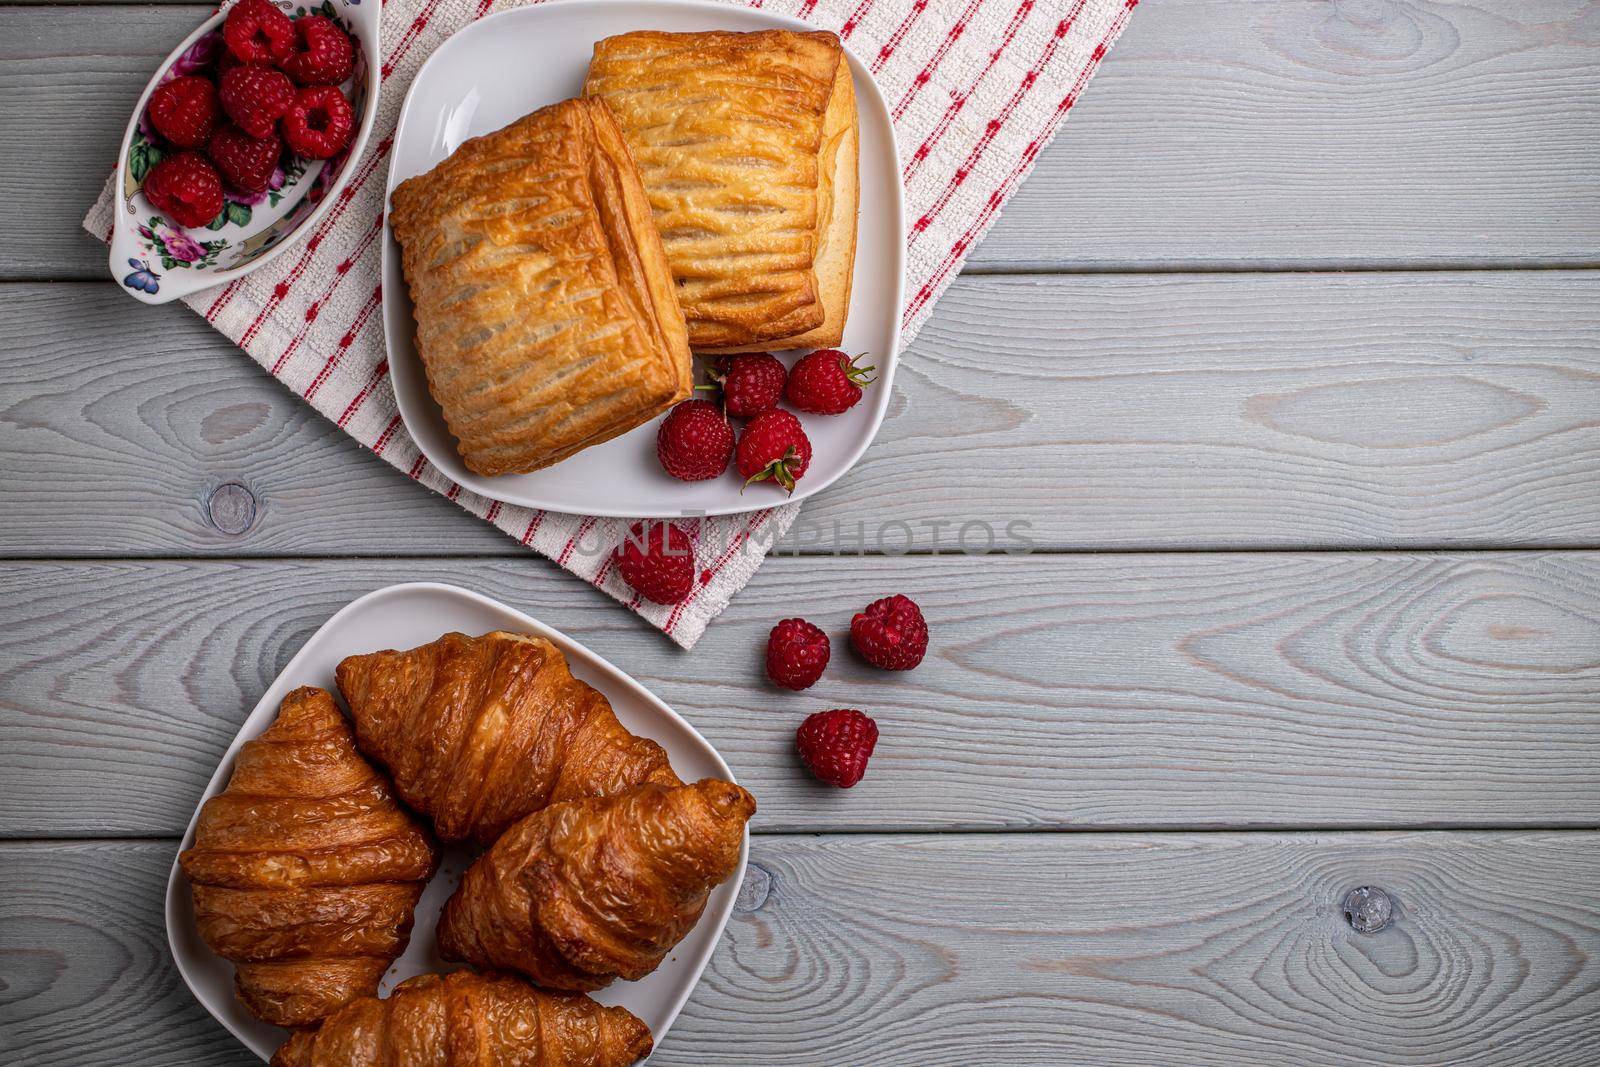 Delicious fresh croissants and sweet raspberry puffs on a wooden table.